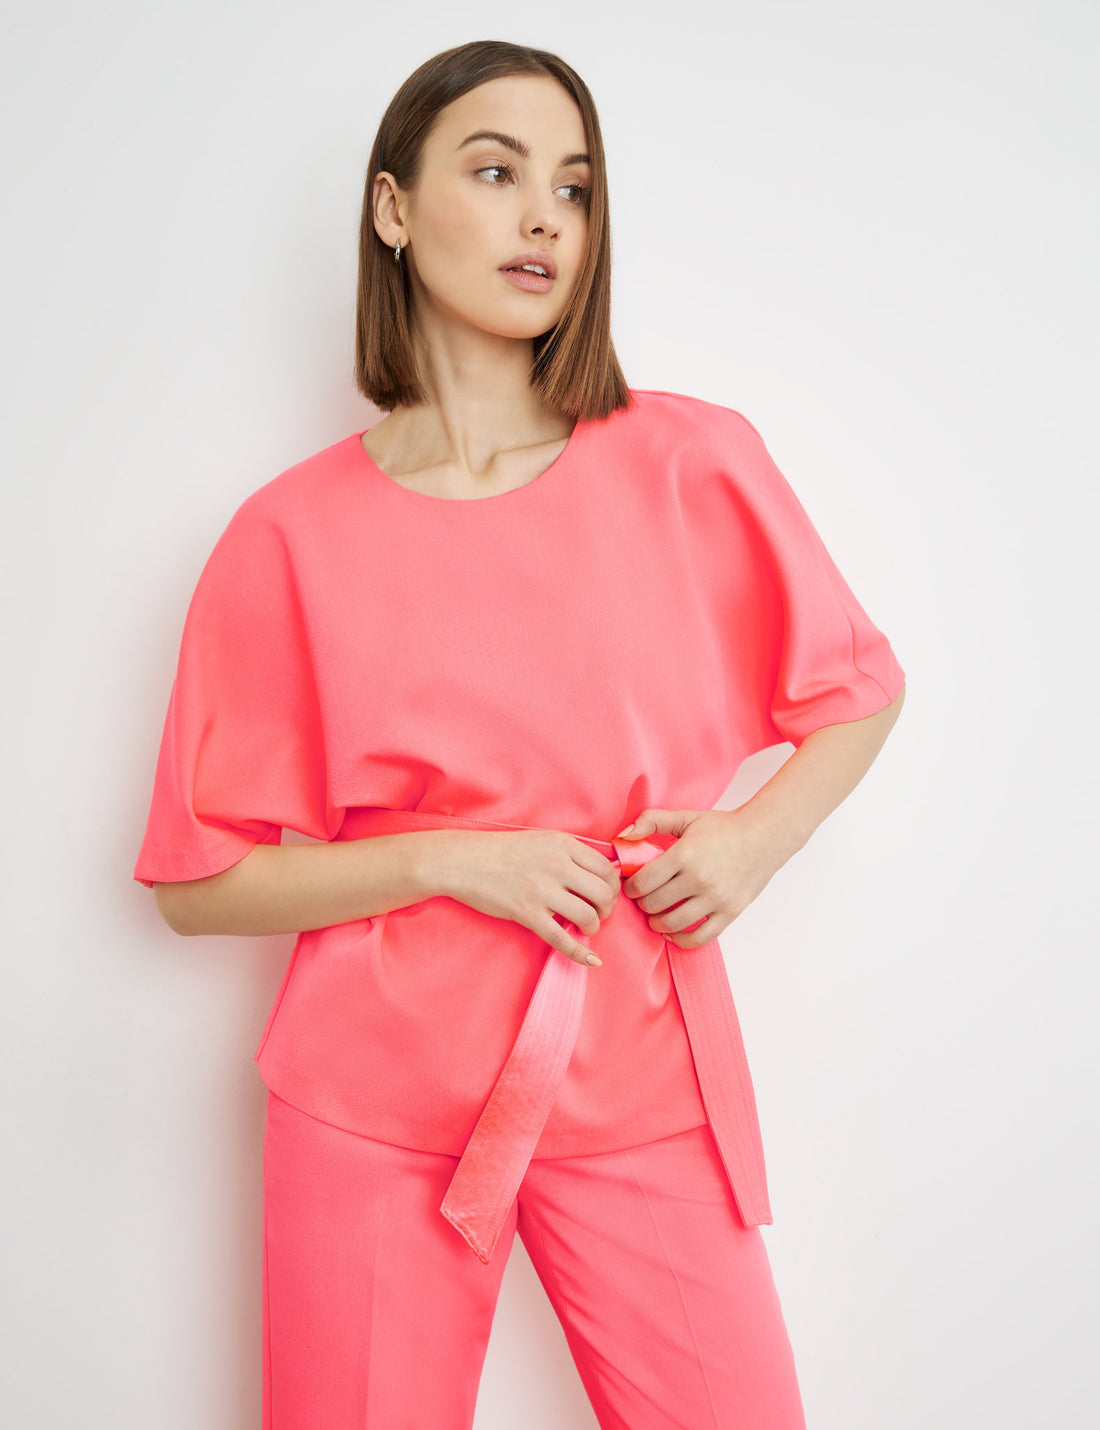 Flowing Blouse With Batwing Sleeves And A Tie-Around Belt_560357-11051_3430_01